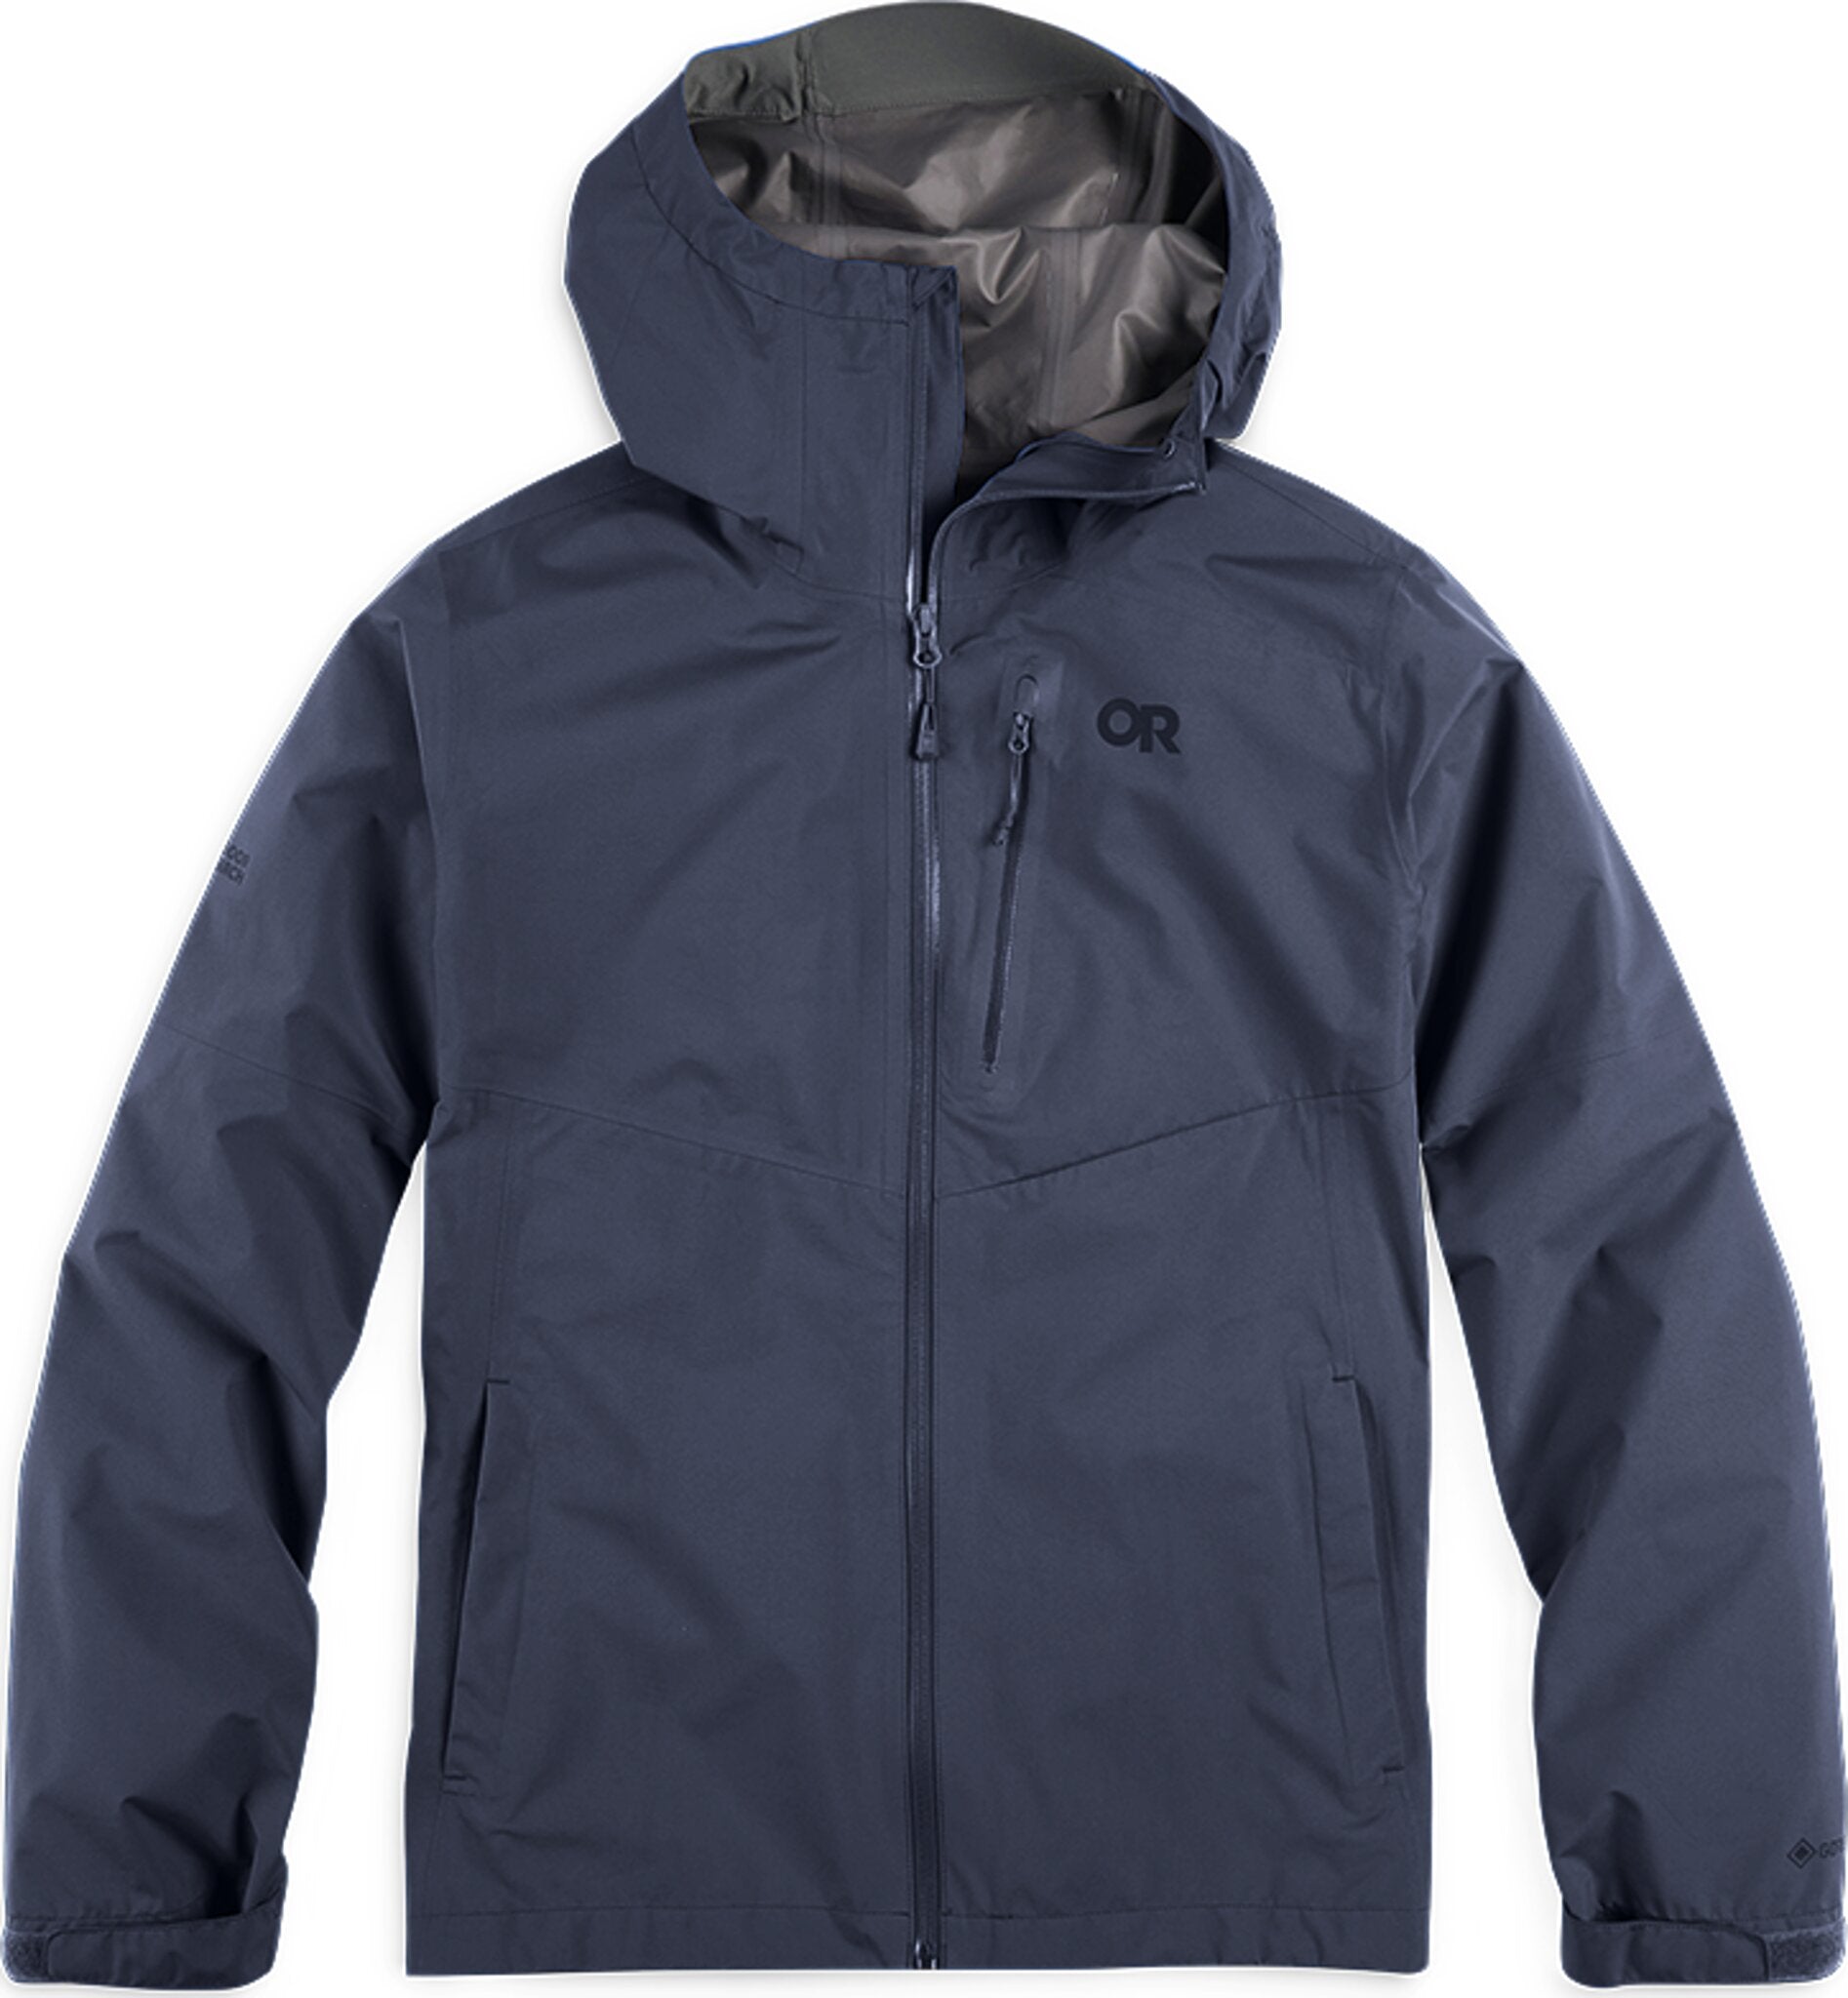 Outdoor Research Foray II Jacket - Men's | Altitude Sports